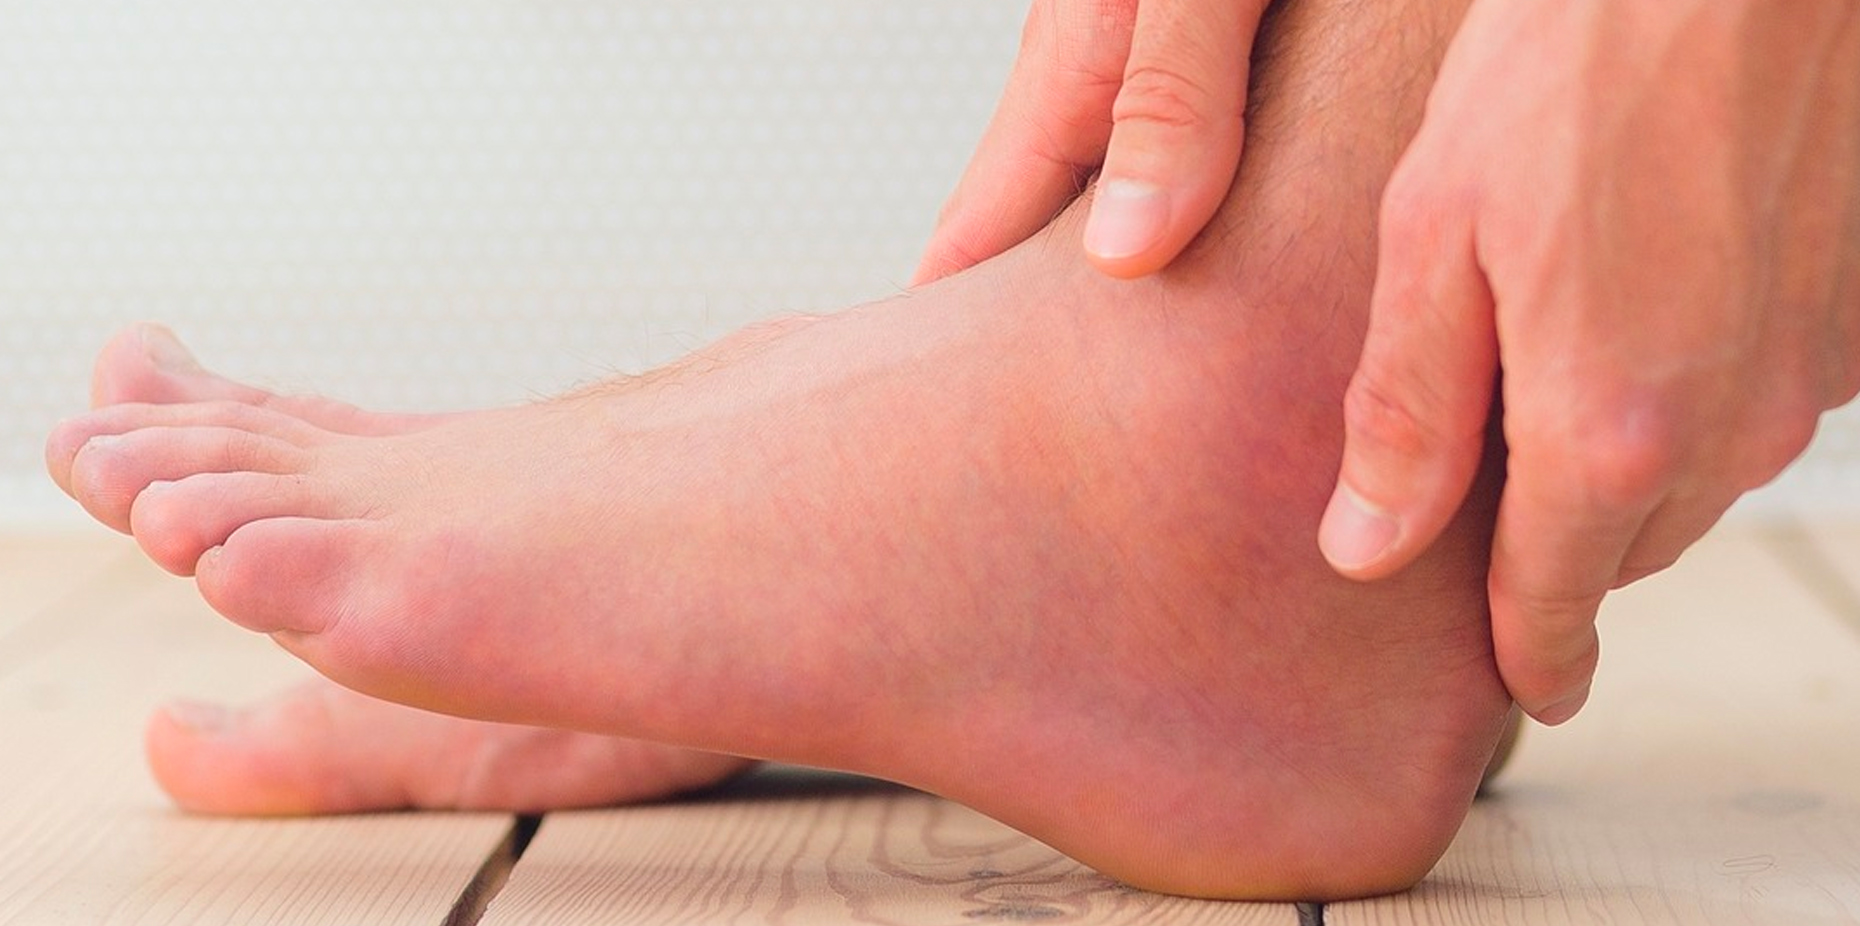 Gout: Symptoms, Causes, Treatments and More